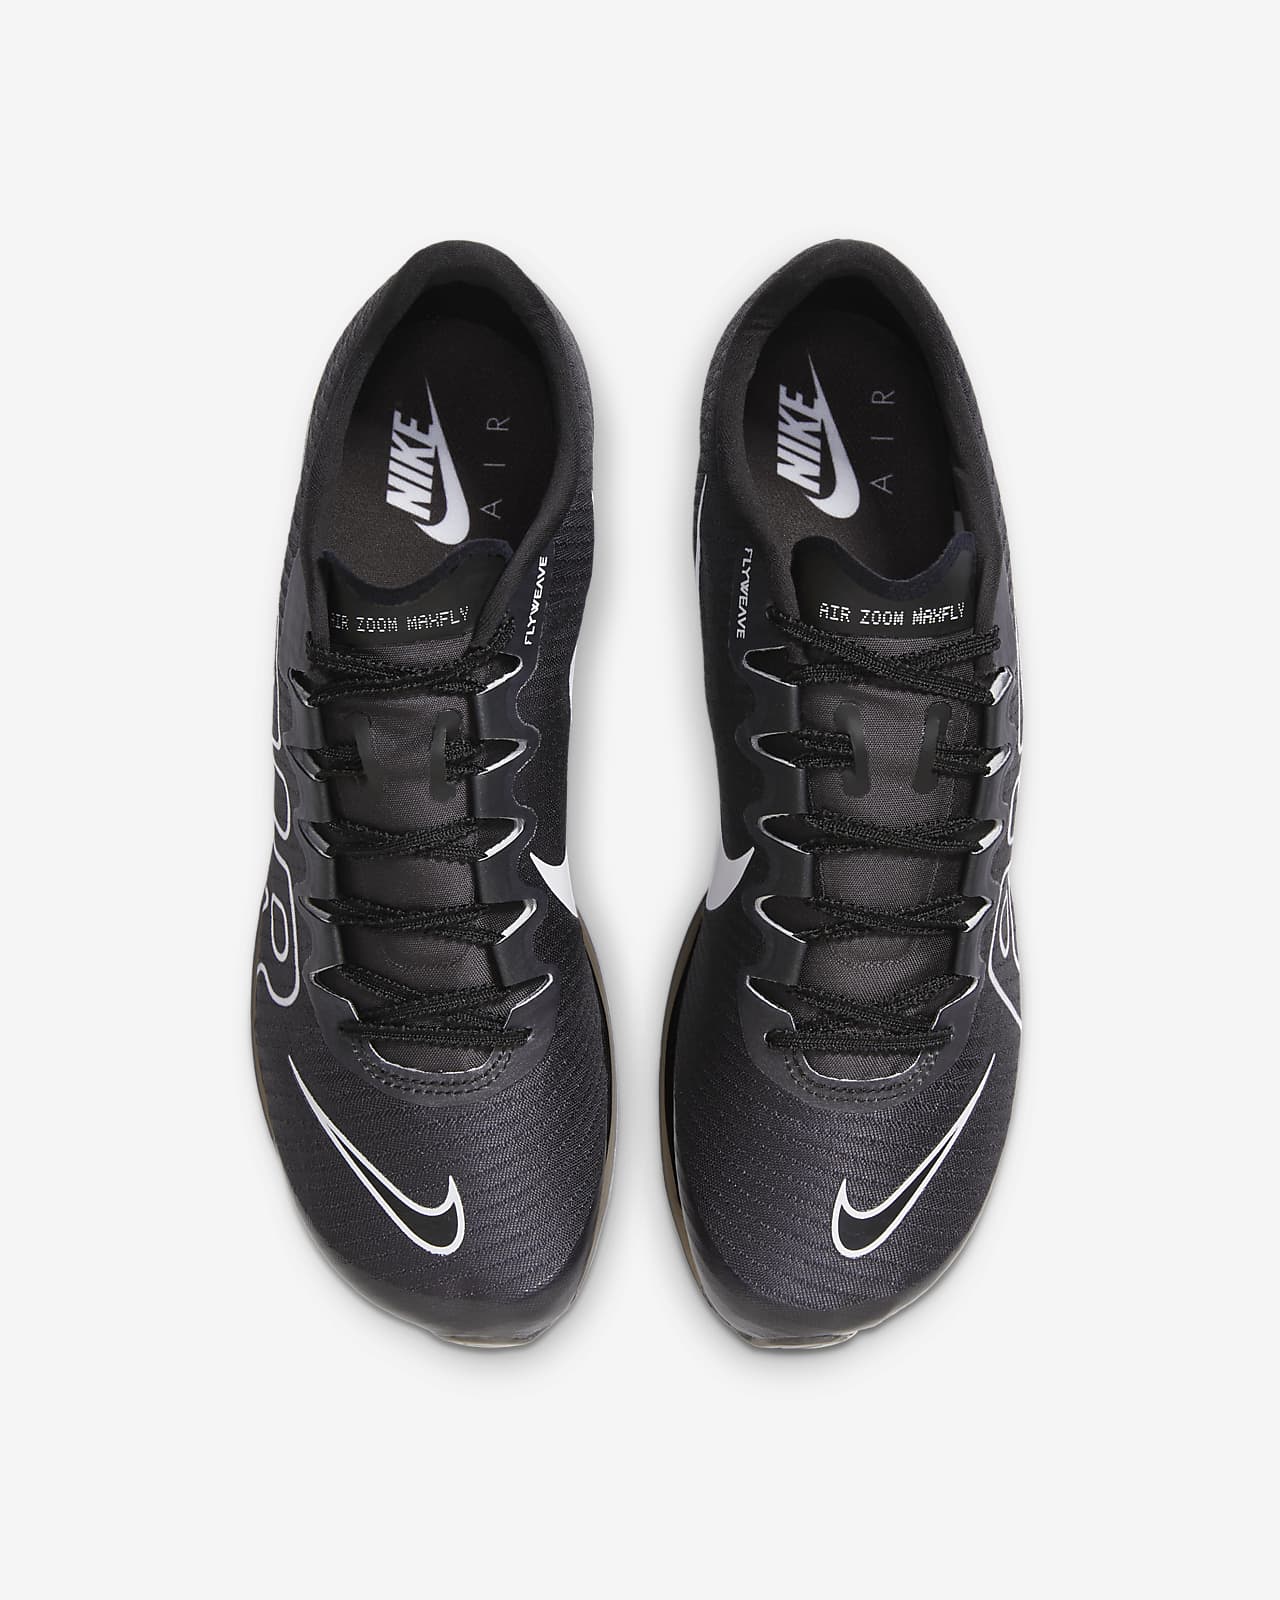 Nike Air Zoom Maxfly More Uptempo 田徑短跑釘鞋。Nike TW